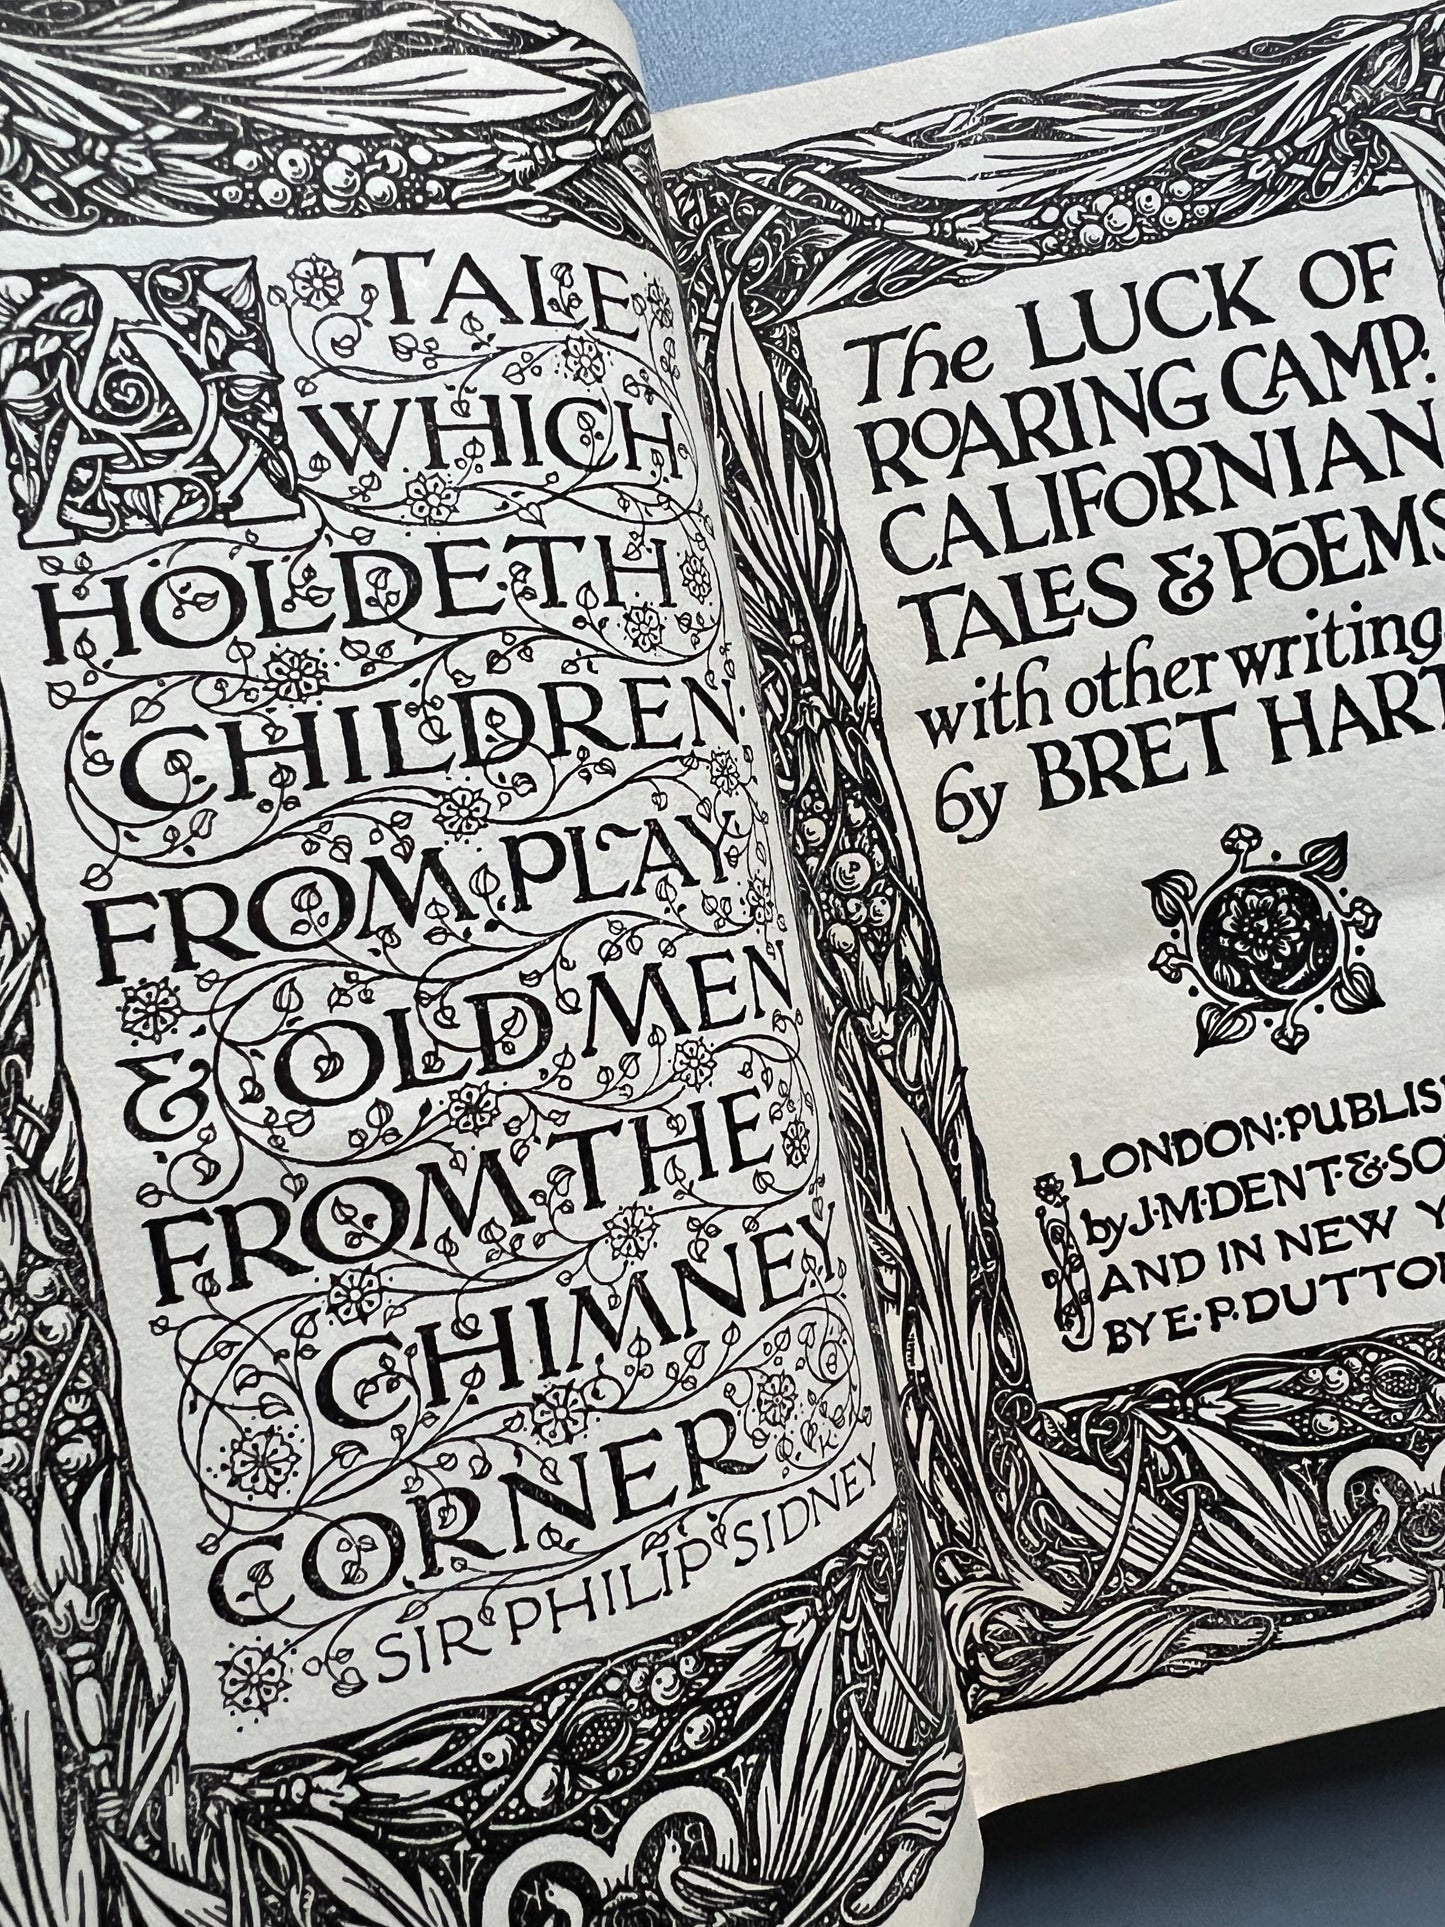 The luck of roaring camp. Californian tales & poems with other writings, Bret Harte - J. M. Dent & Sons, ca. 1915